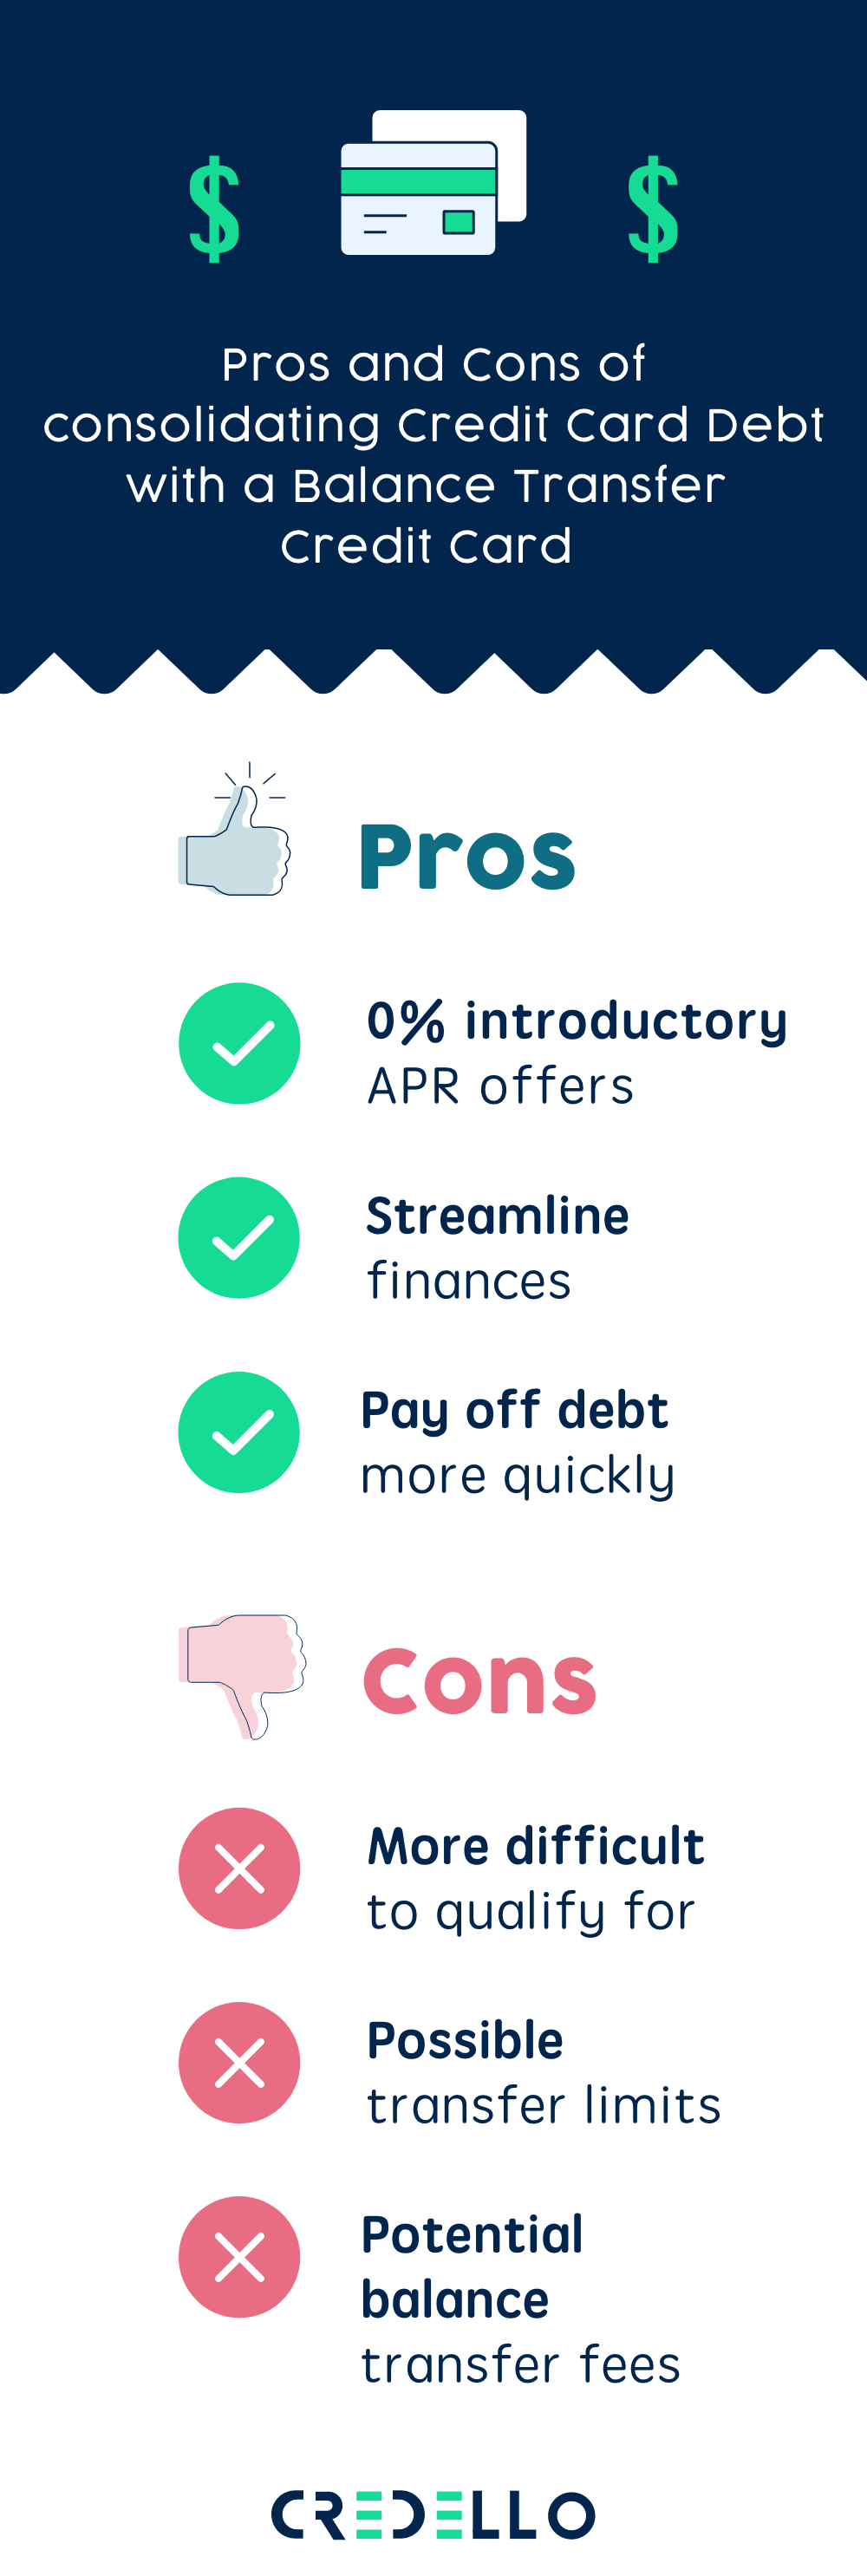 Pros and Cons of Consolidating Credit Card Debt